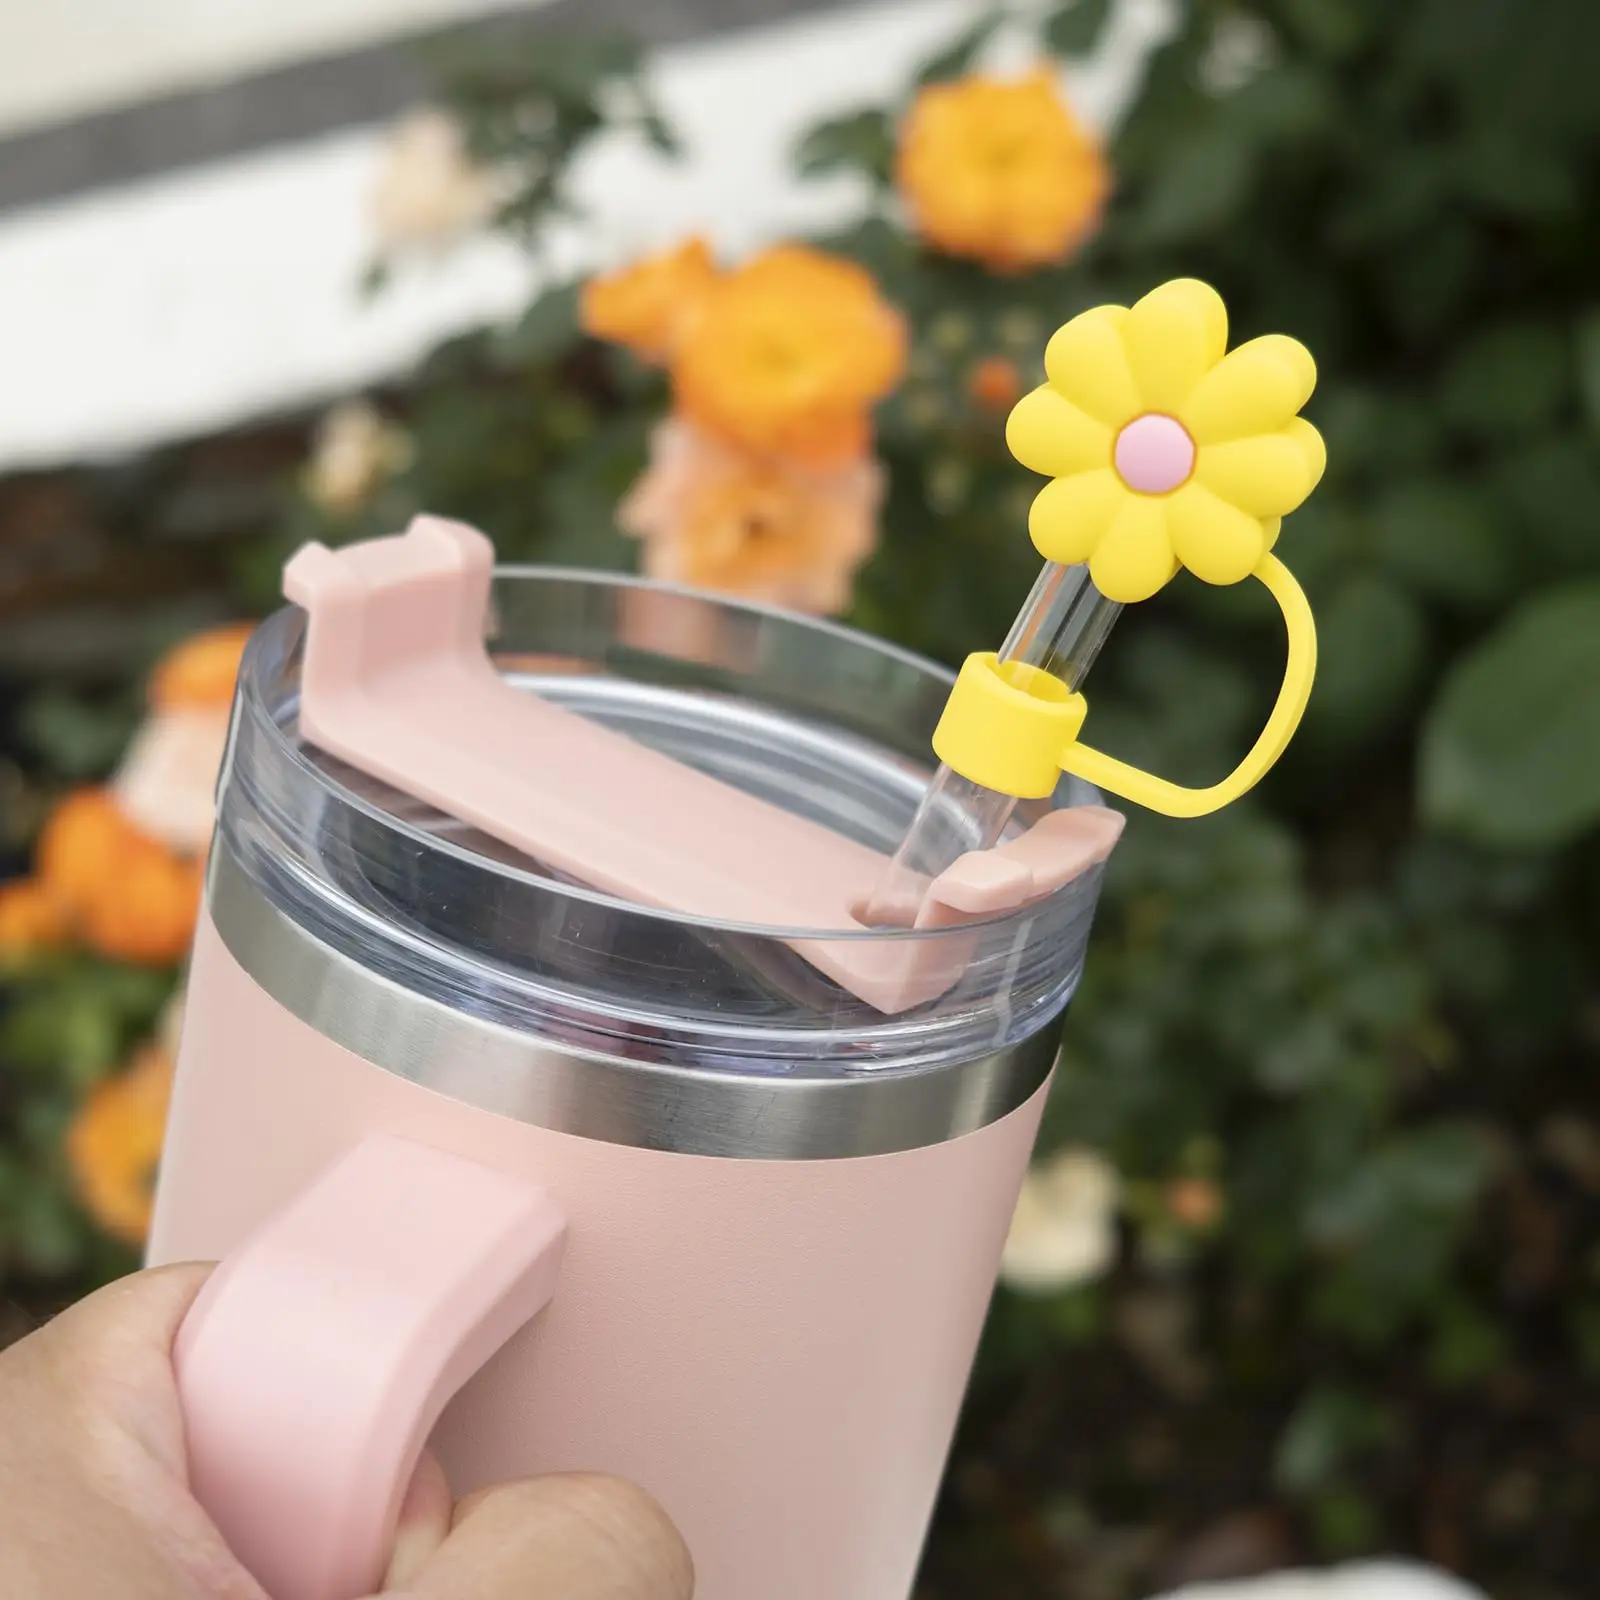 https://ae01.alicdn.com/kf/S7c3dee69c8f34540bd198736b5824050j/Silicone-Straw-Mouth-Drinking-Dust-Cover-Splash-Proof-Stopper-Cover-Creative-Cup-Accessories-10mm-Straw-Reusable.jpg